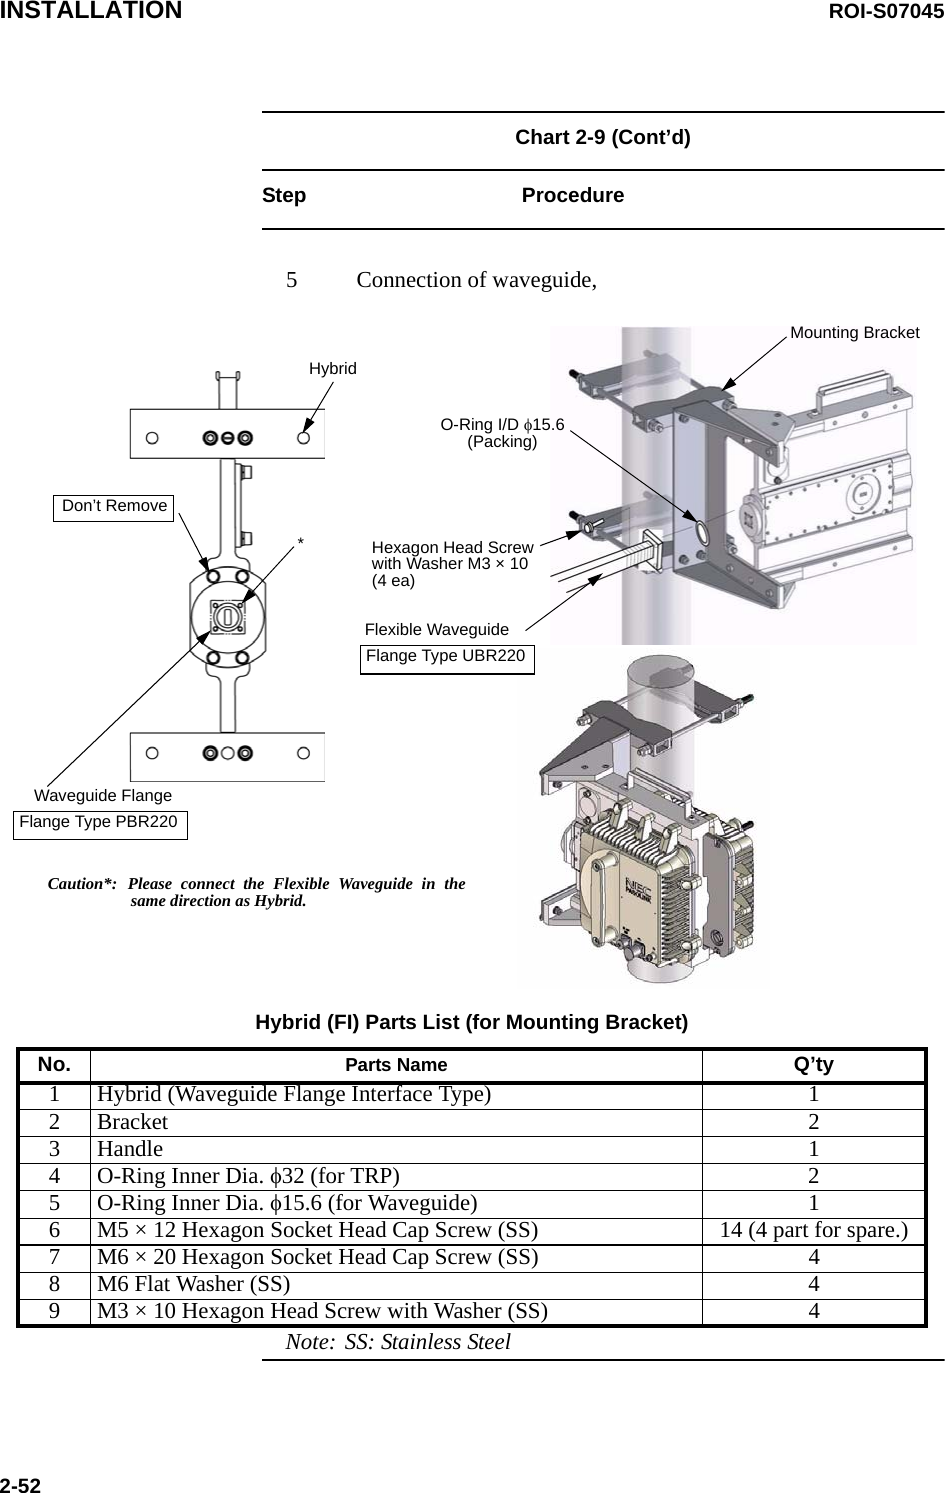 INSTALLATION ROI-S070452-52Chart 2-9 (Cont’d) Step Procedure5 Connection of waveguide,Note: SS: Stainless SteelHybridWaveguide FlangeFlange Type PBR220Don’t Remove*Mounting BracketO-Ring I/D φ15.6(Packing)Hexagon Head Screwwith Washer M3 × 10(4 ea)Flexible WaveguideFlange Type UBR220Caution*: Please connect the Flexible Waveguide in thesame direction as Hybrid.Hybrid (FI) Parts List (for Mounting Bracket)No. Parts Name Q’ty1 Hybrid (Waveguide Flange Interface Type) 12Bracket 23Handle 14 O-Ring Inner Dia. φ32 (for TRP) 25 O-Ring Inner Dia. φ15.6 (for Waveguide) 16 M5 × 12 Hexagon Socket Head Cap Screw (SS) 14 (4 part for spare.)7 M6 × 20 Hexagon Socket Head Cap Screw (SS) 48 M6 Flat Washer (SS) 49 M3 × 10 Hexagon Head Screw with Washer (SS) 4